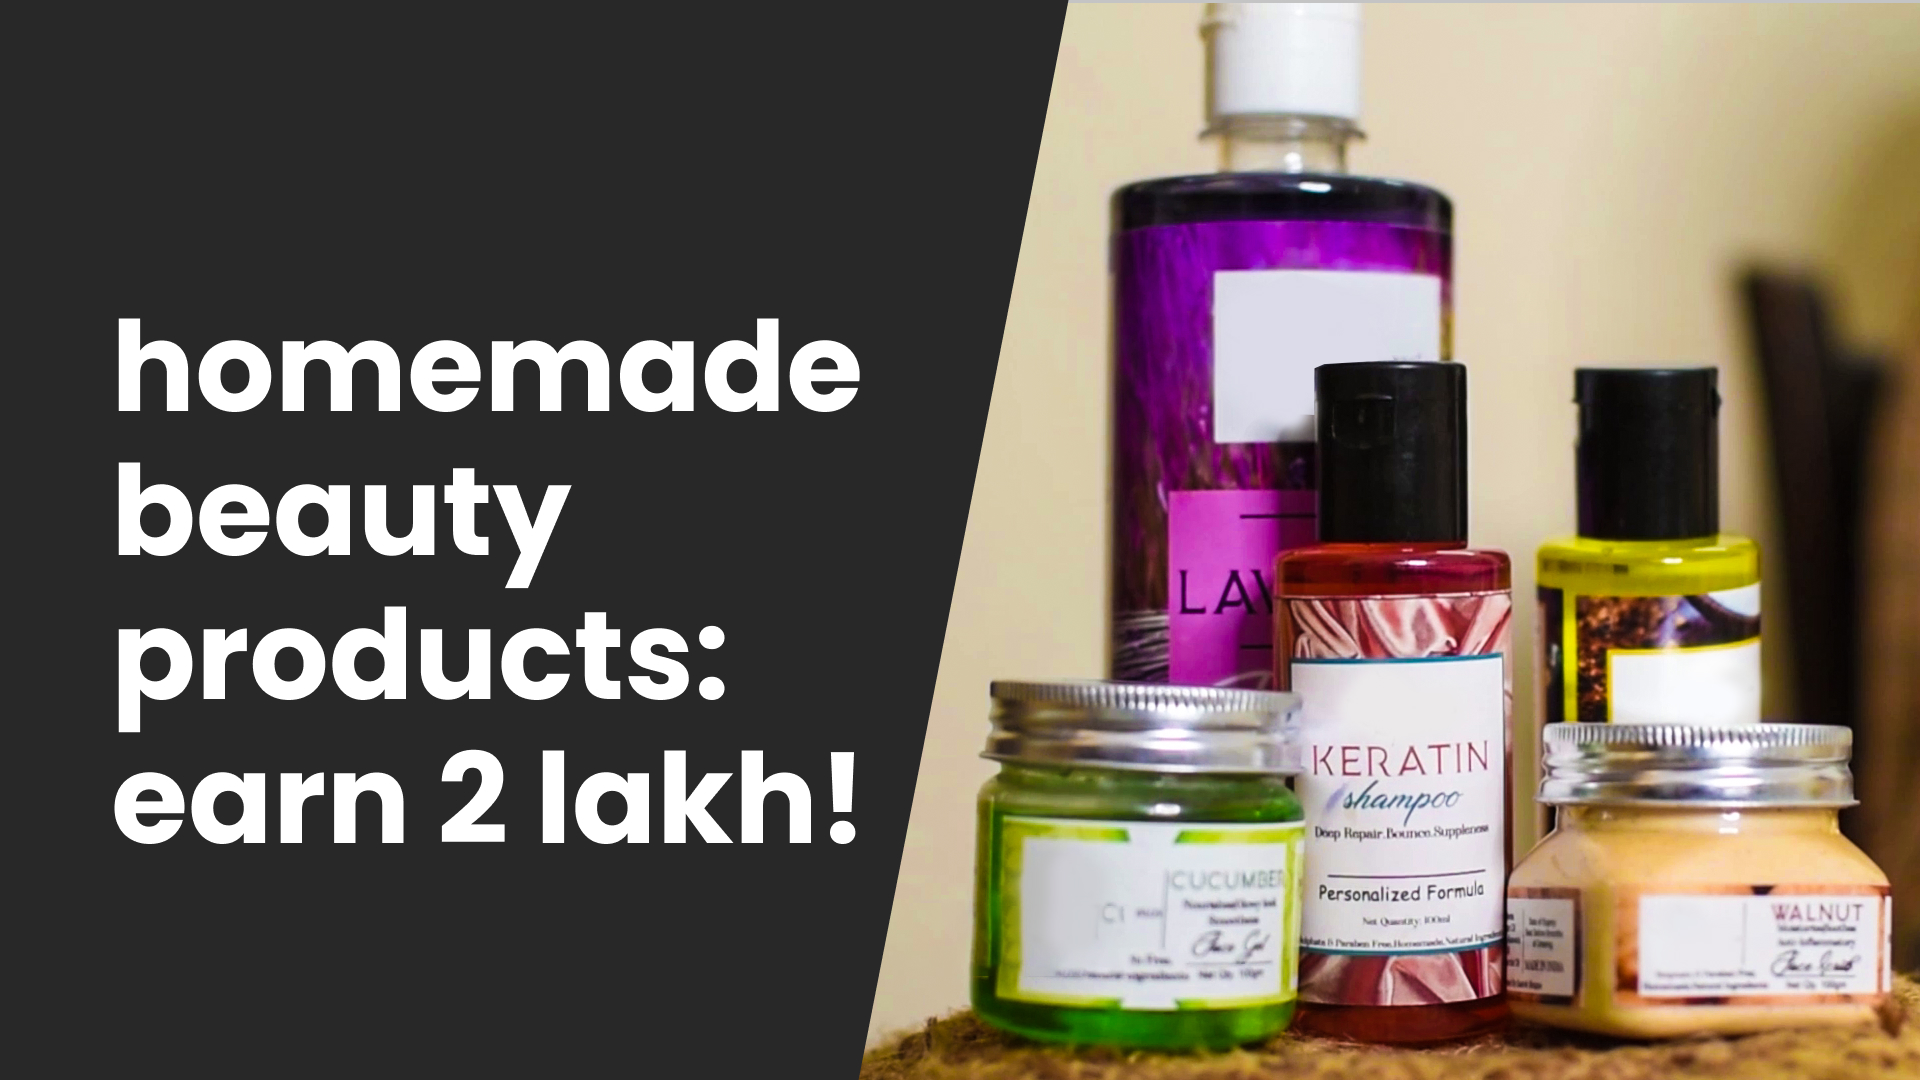 Course Trailer: Home Made Beauty Products Business - Earn upto 2 Lakh/Month. Watch to know more.